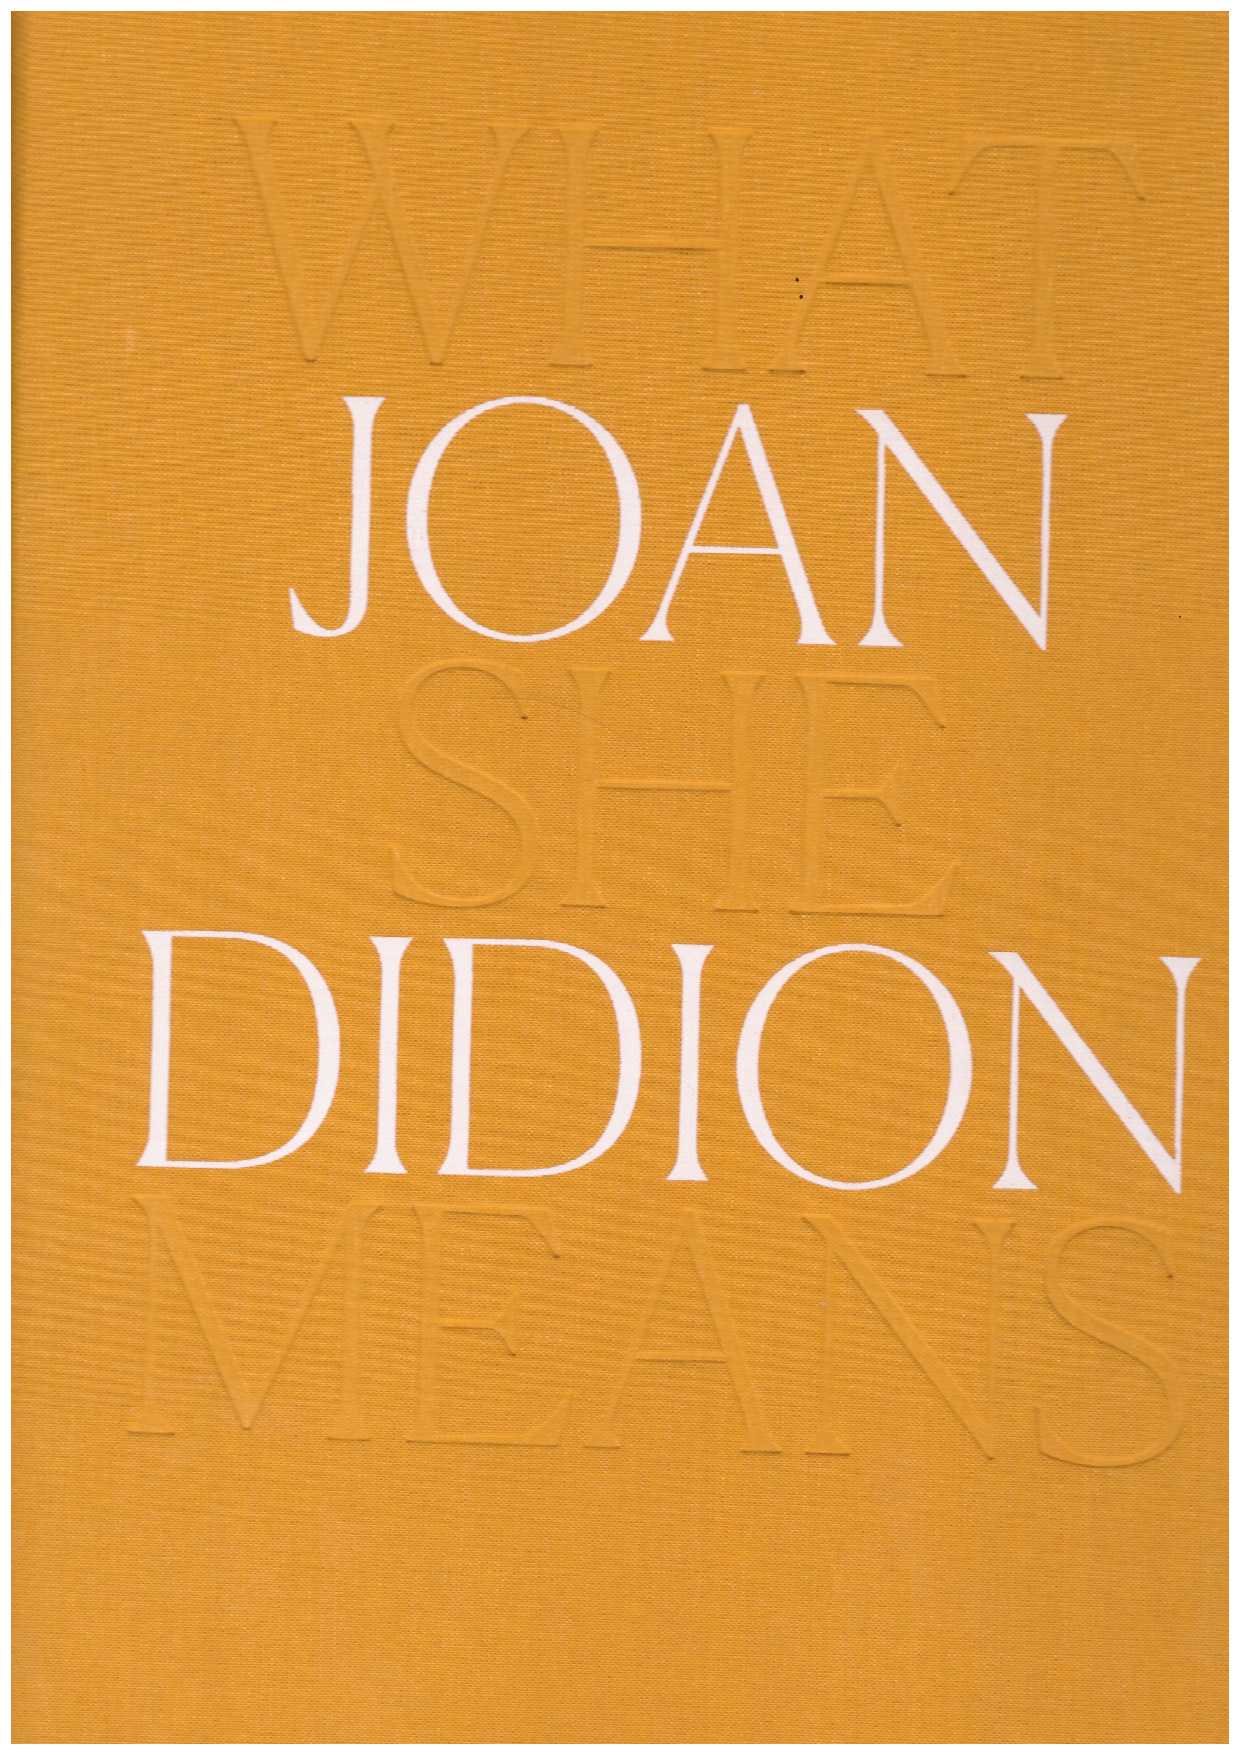 ALS, Hilton; BUTLER, Connie (ed) - Joan Didion. What She Means